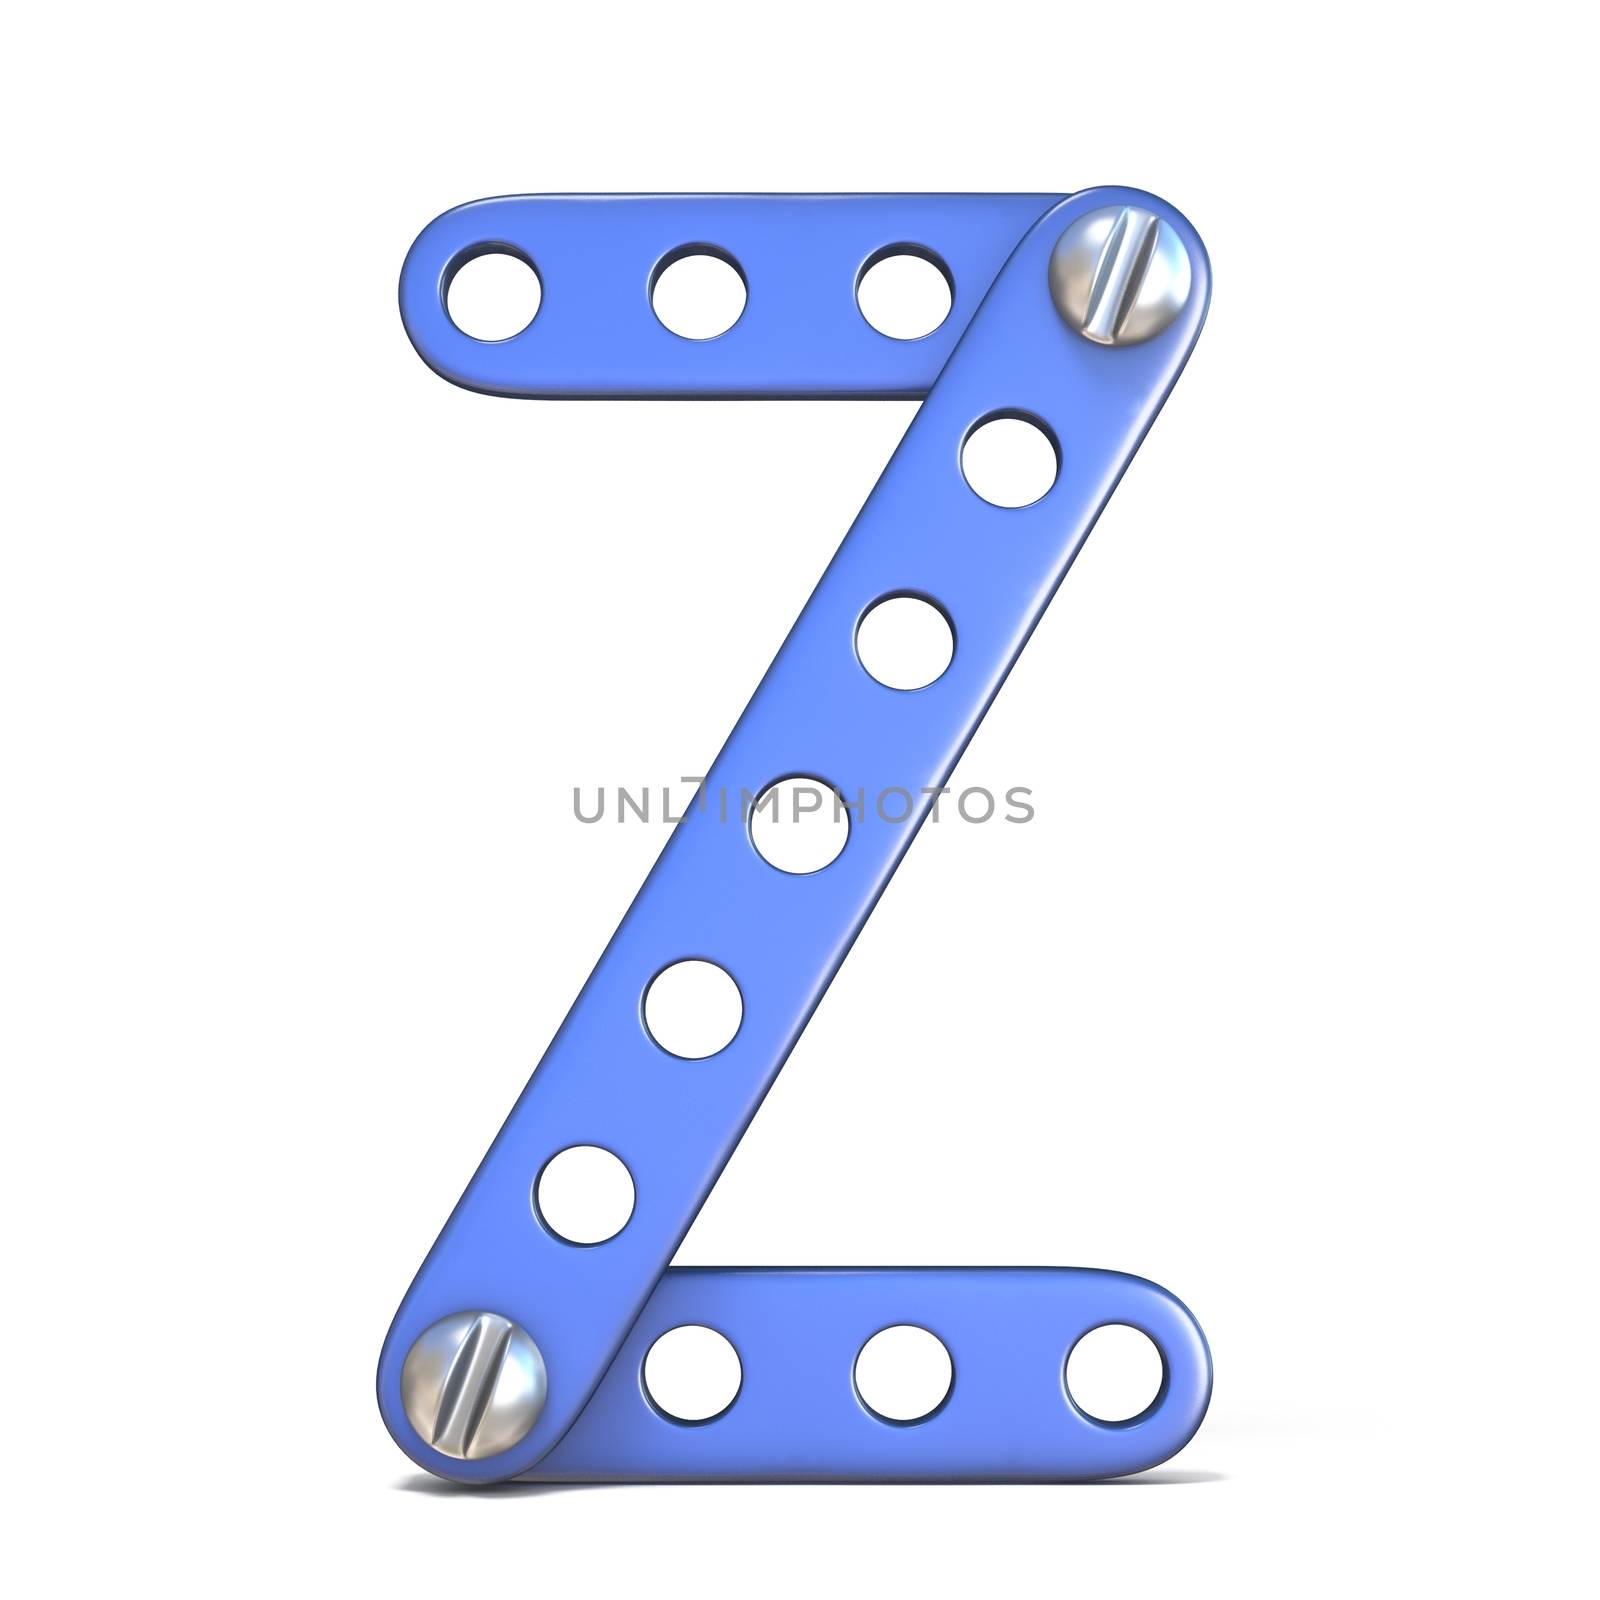 Alphabet made of blue metal constructor toy Letter Z 3D by djmilic